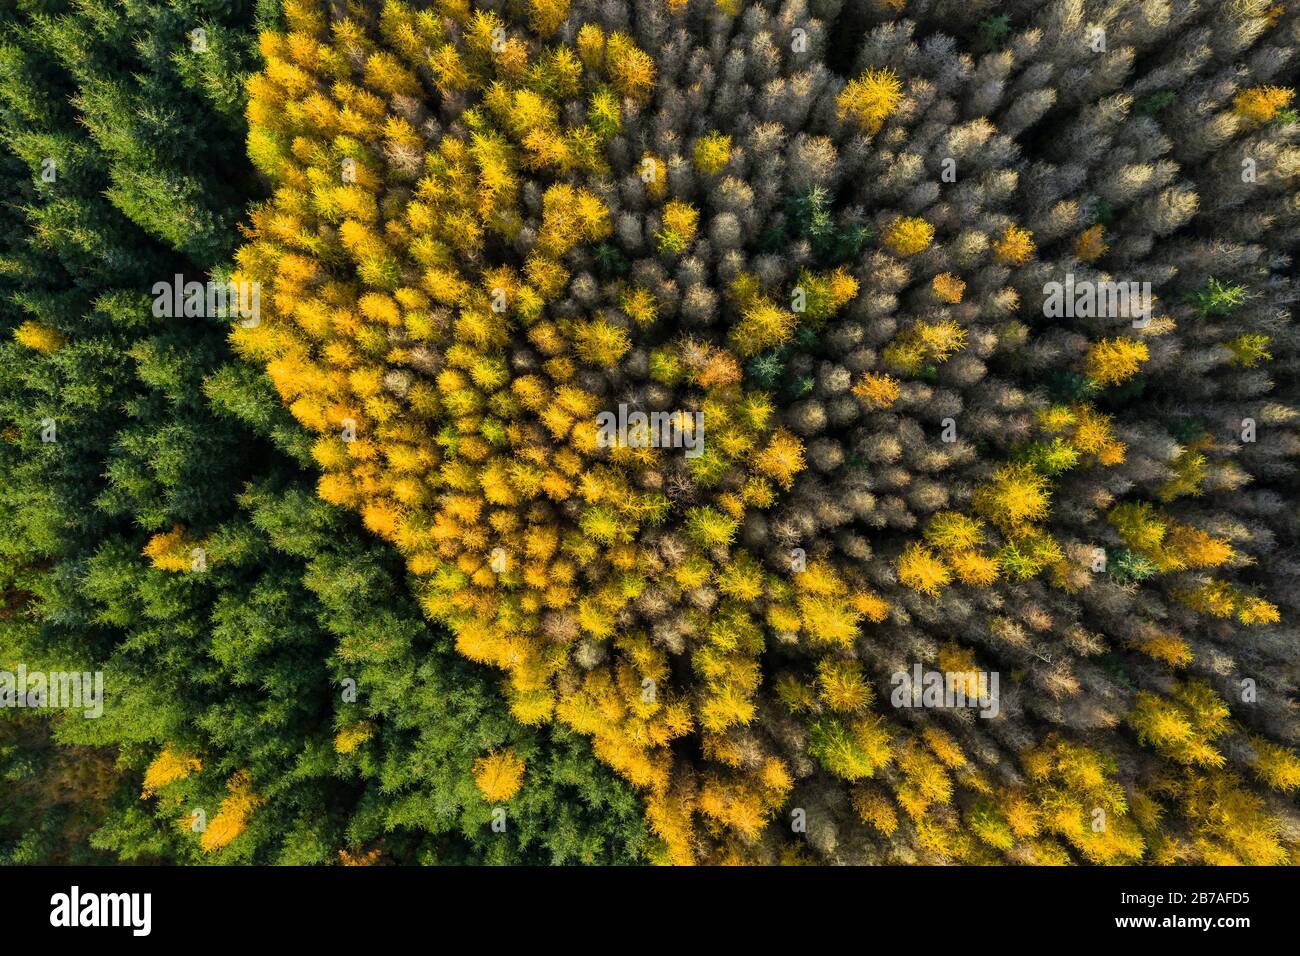 Aerial view of larch and spruce trees in autumn, Galloway Forest, Dumfries & Galloway, Scotland Stock Photo